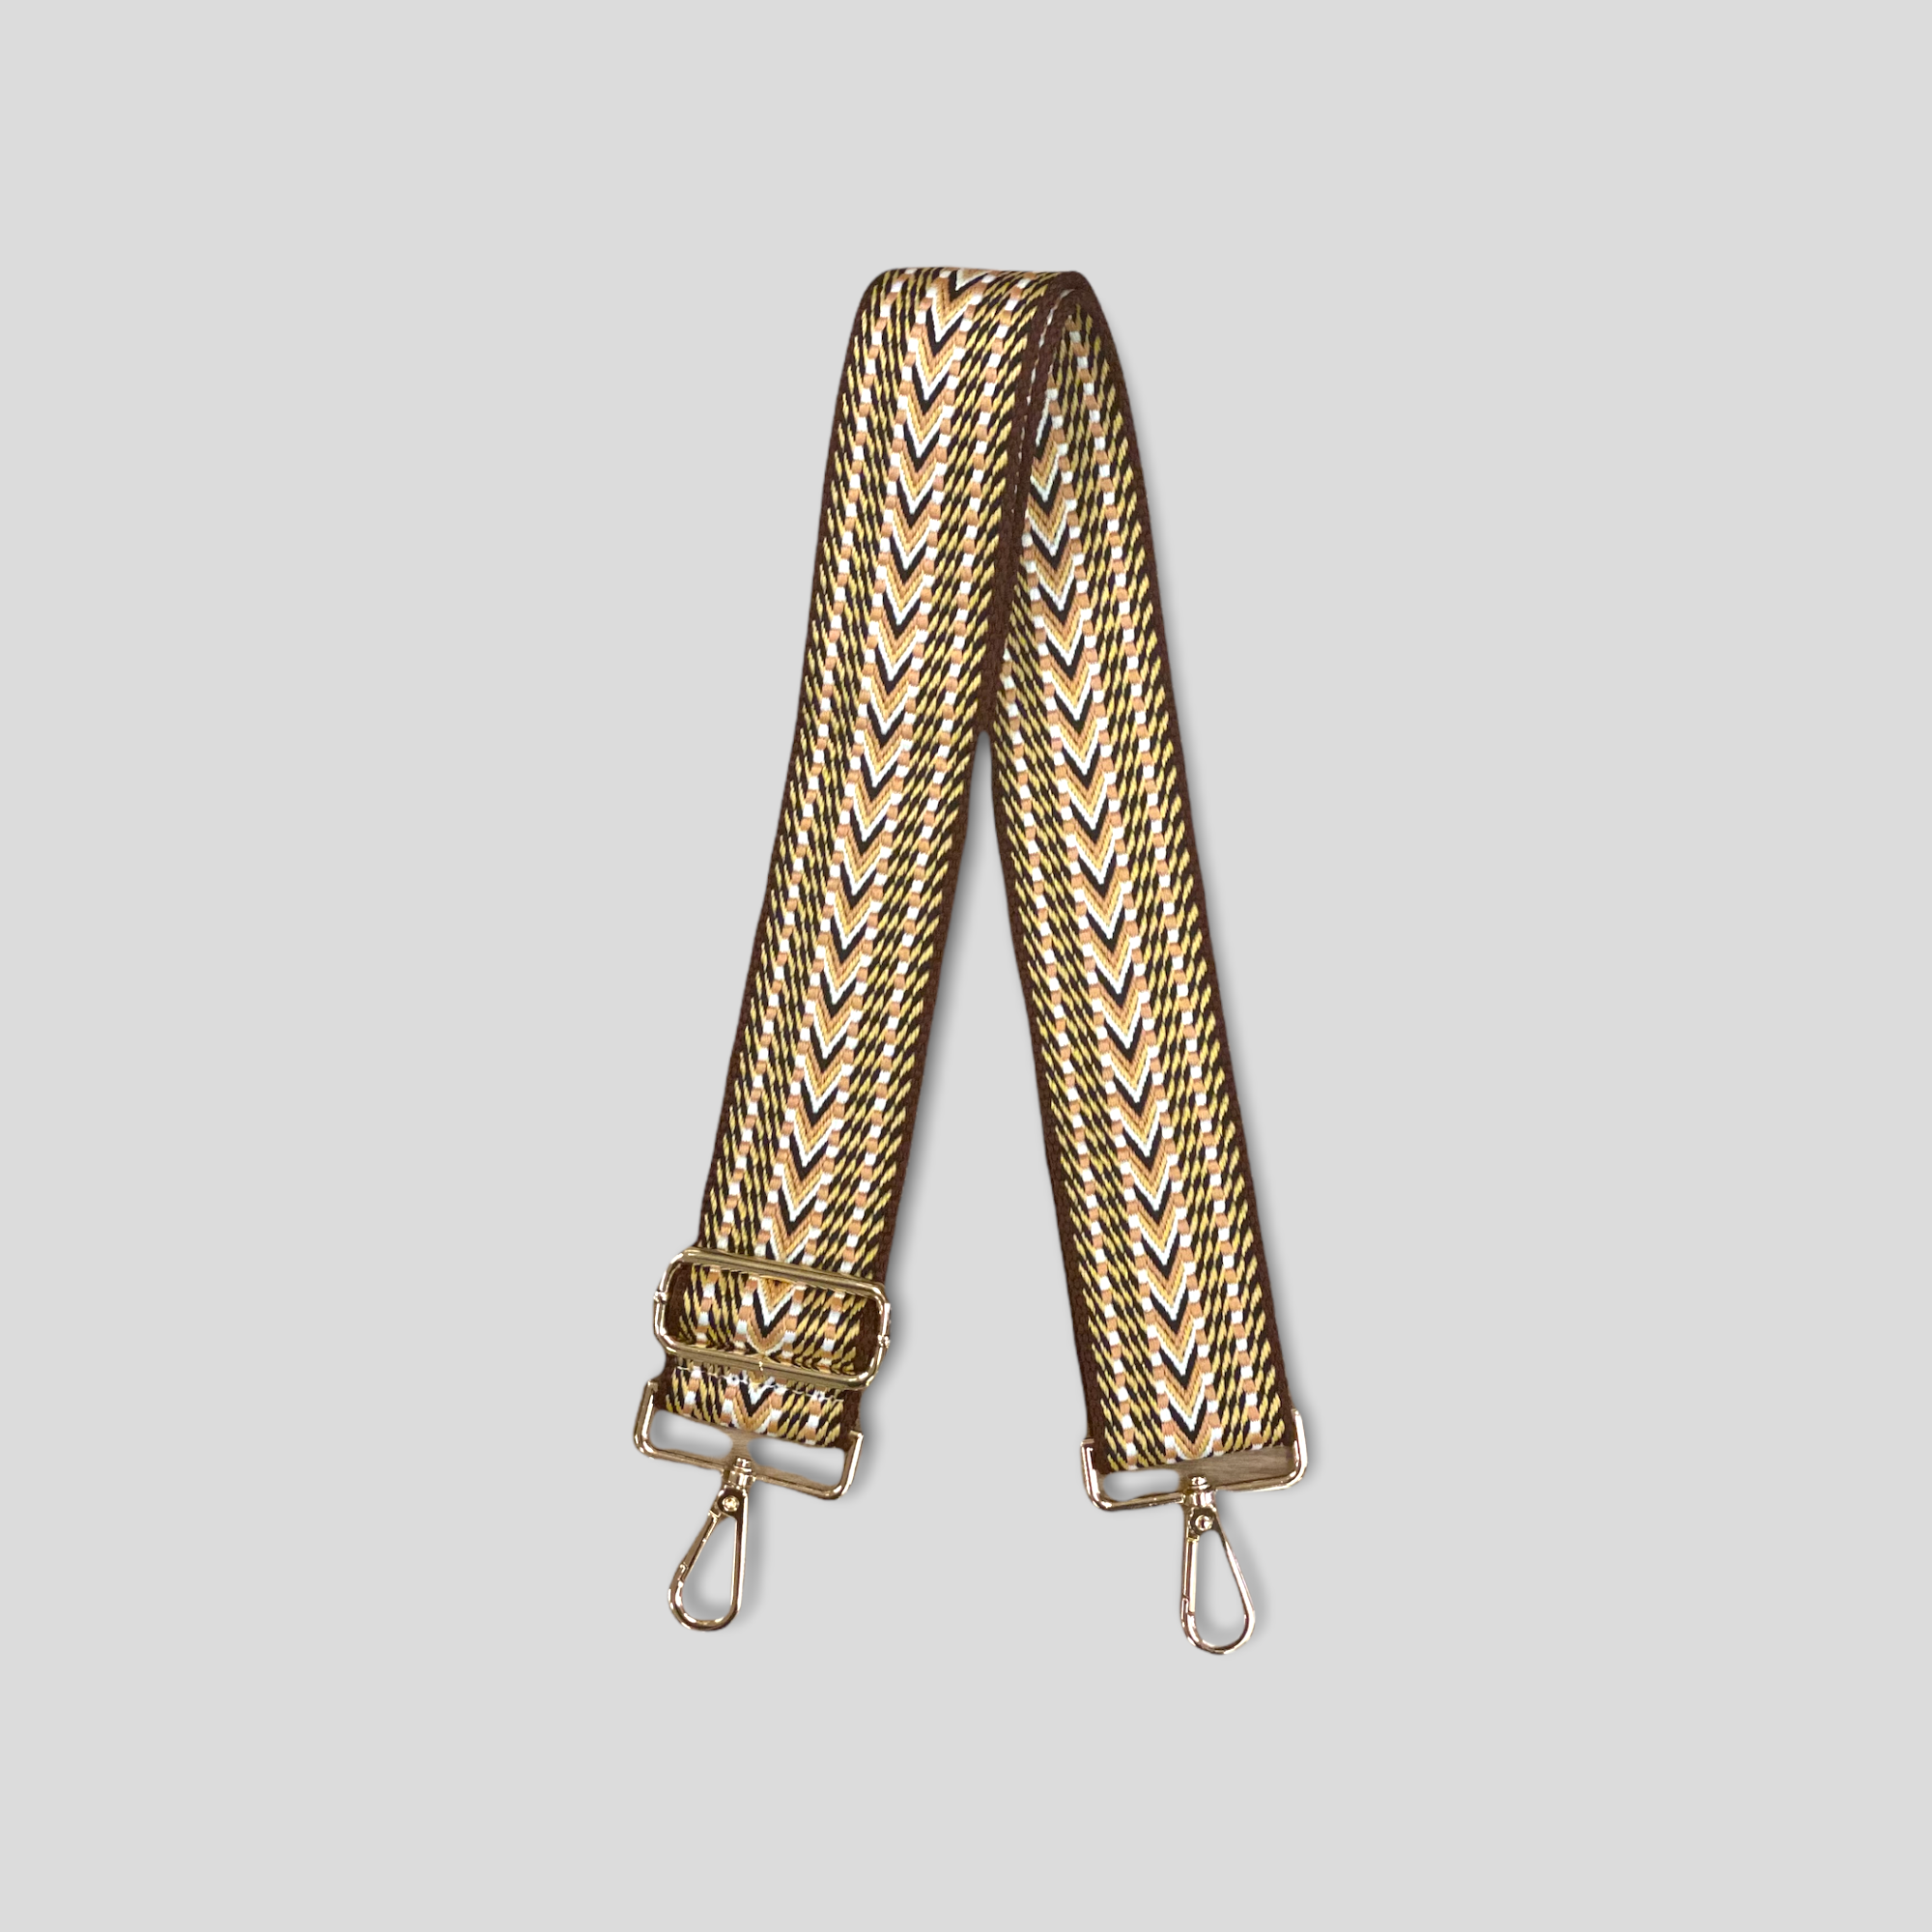 Ahdorned Woven Embroidered Bag Strap - Brown/Peach/Yellow (Gold Hardwa -  Her Hide Out